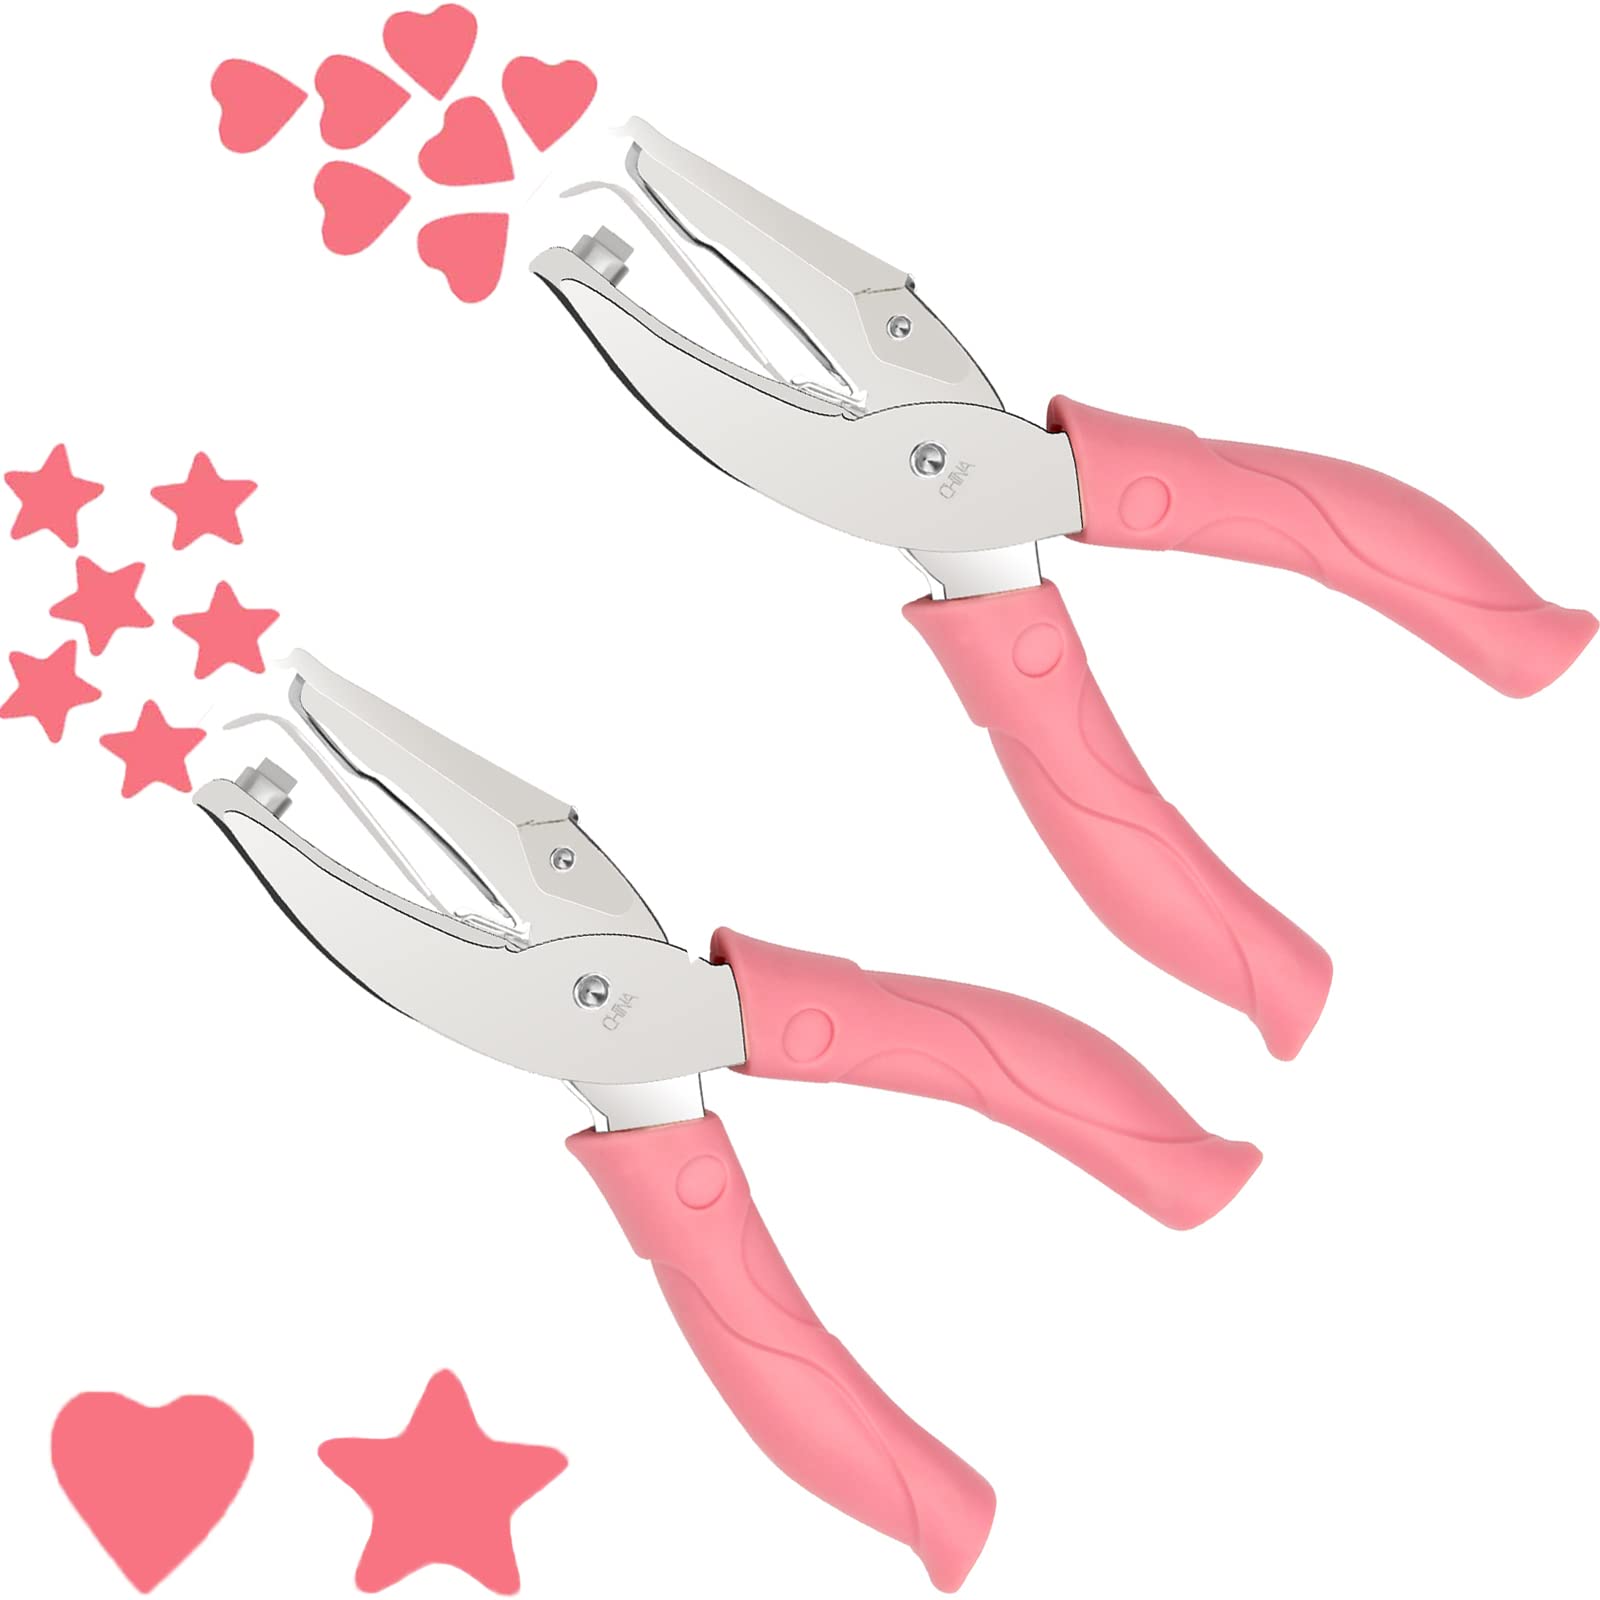 2 Pieces Handheld Hole Paper Punch Pletpet Heart Hole Punch + Star